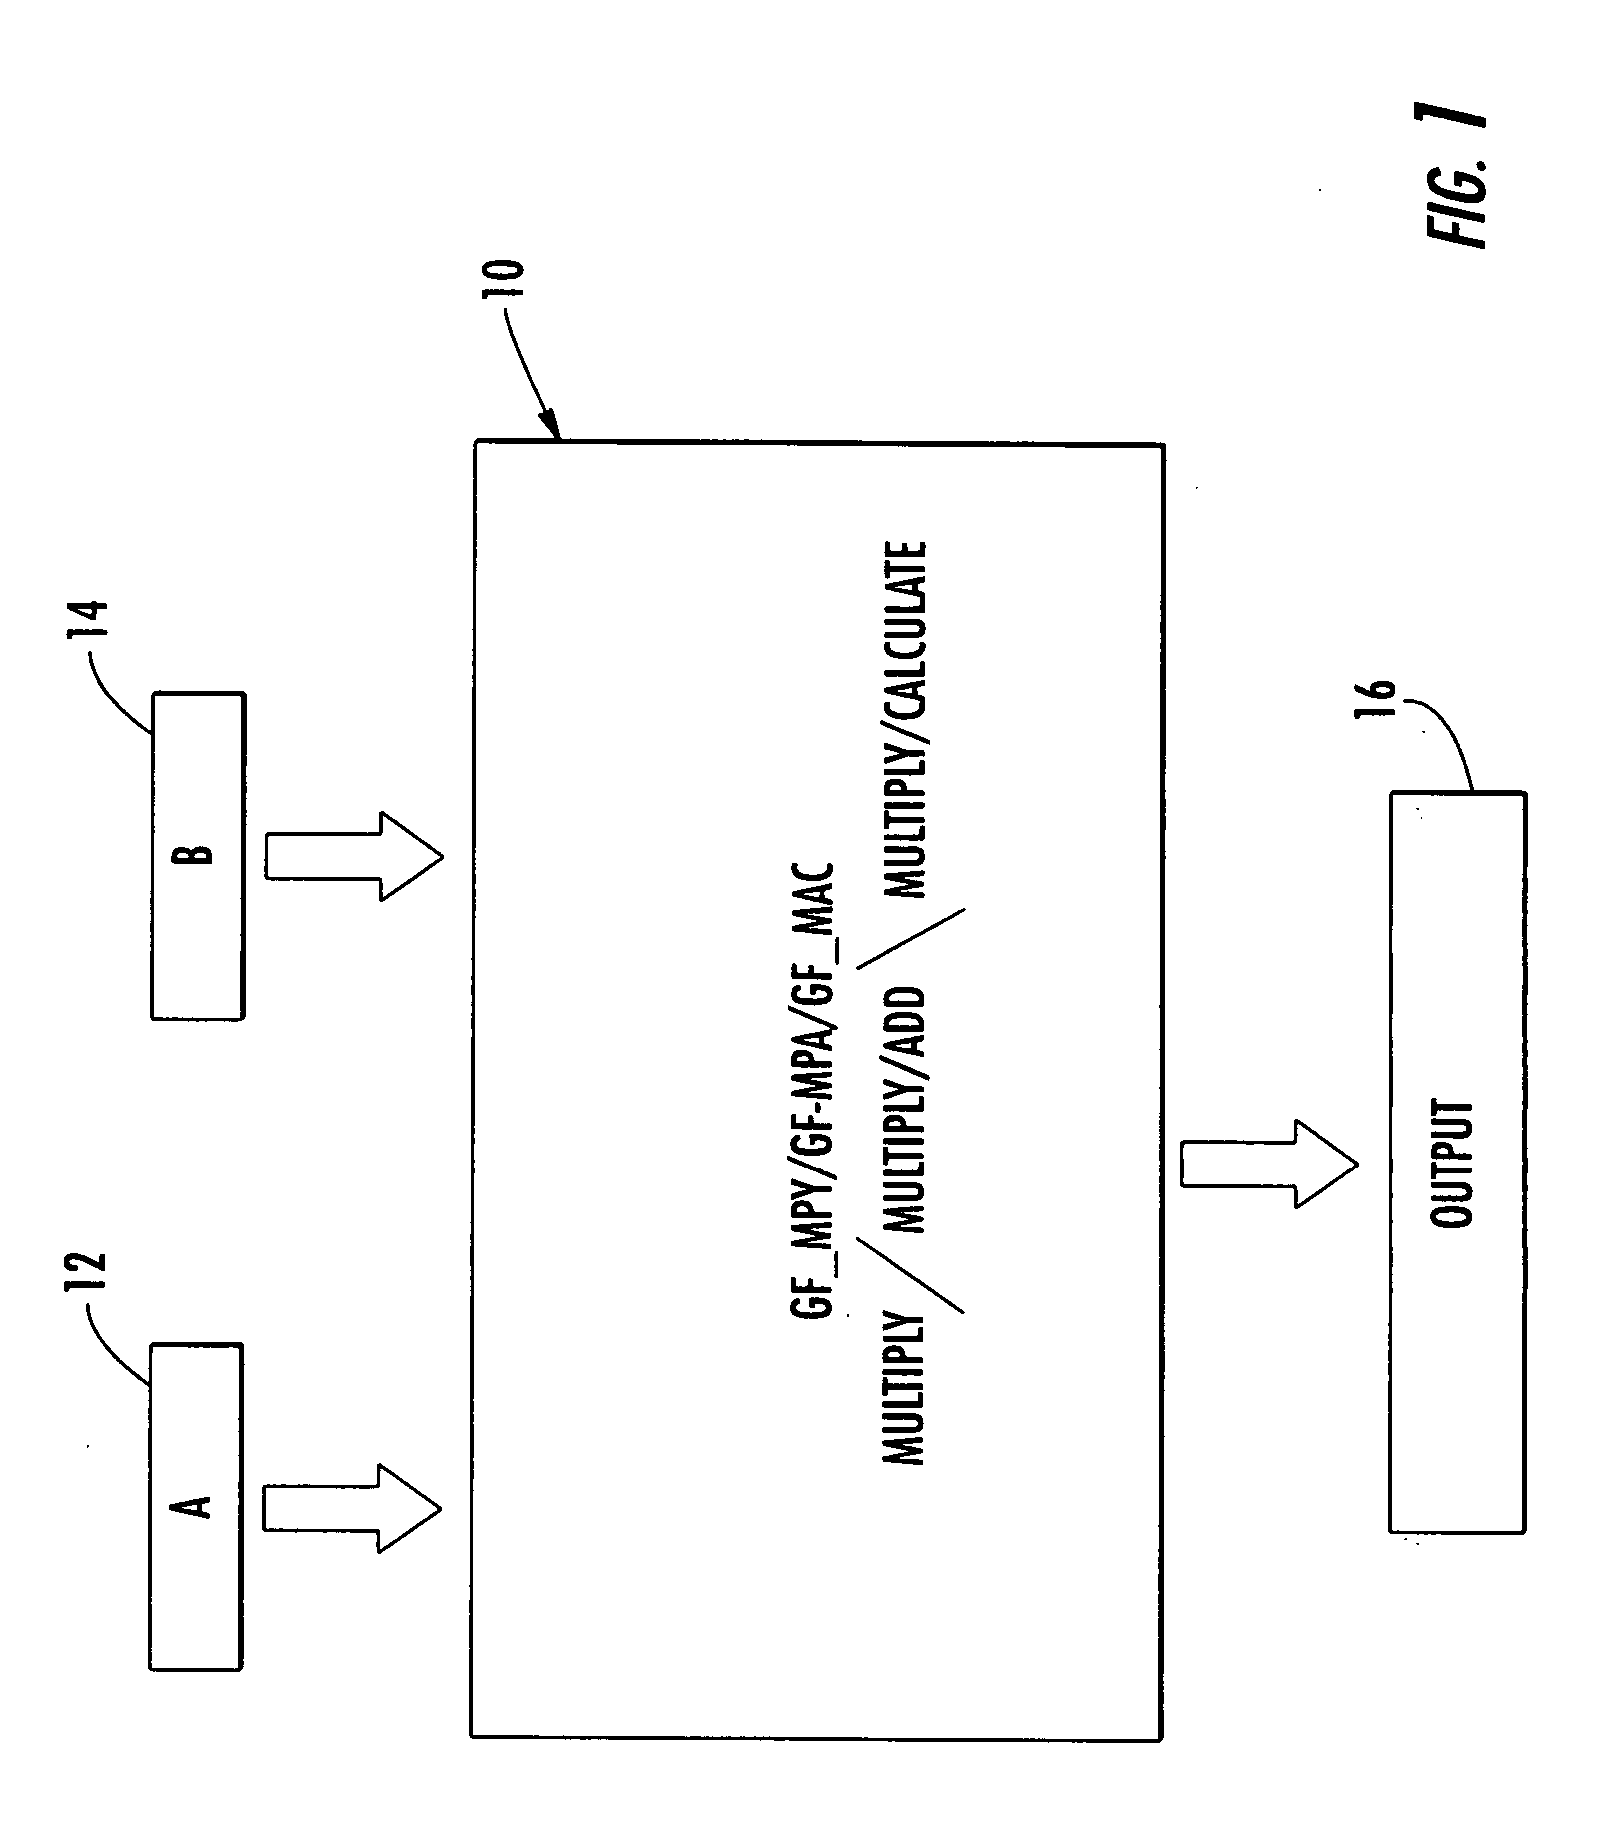 Compound galois field engine and galois field divider and square root engine and method